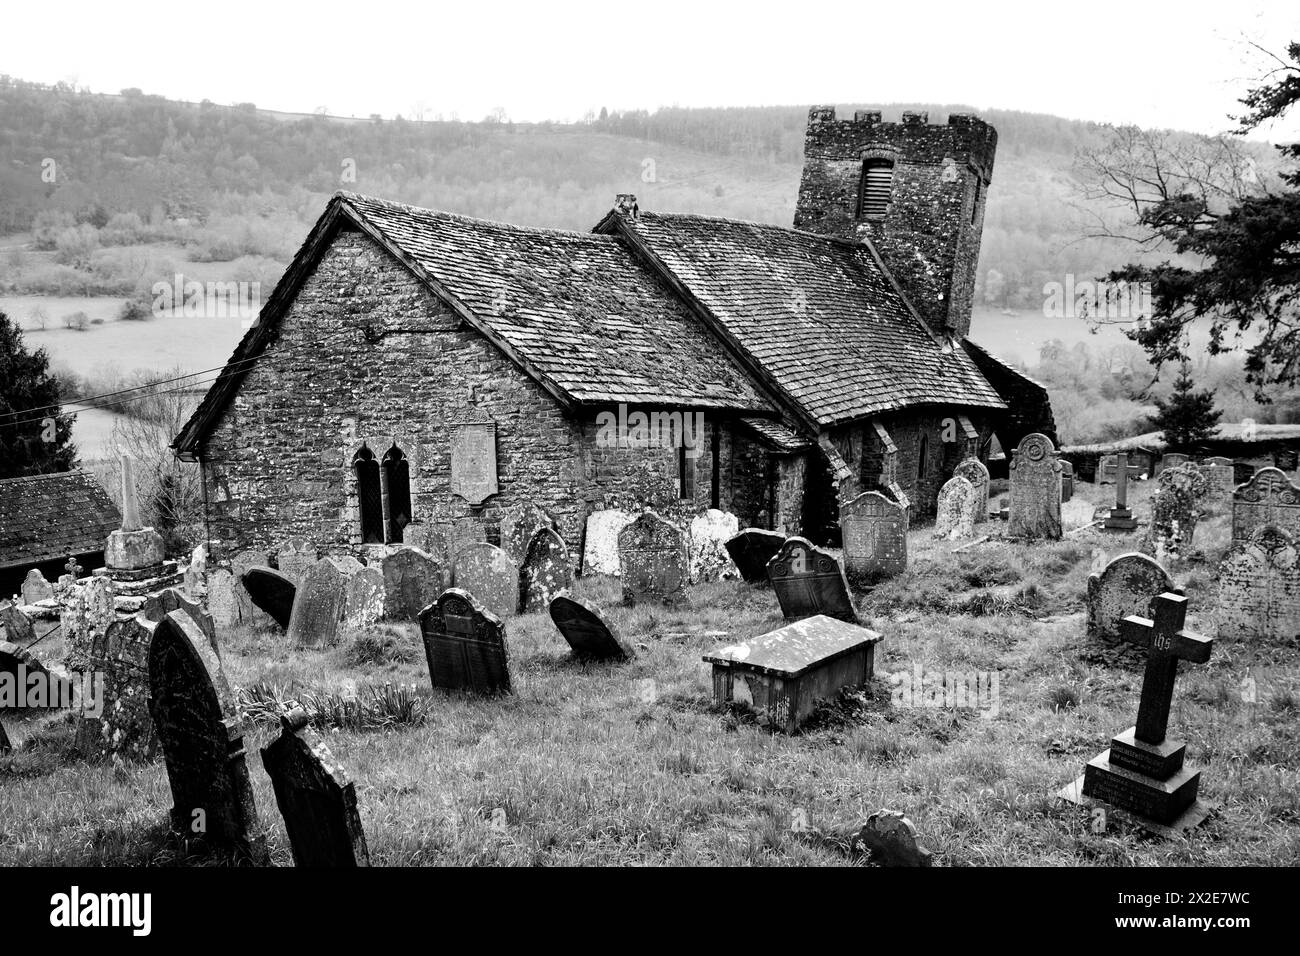 St Martin’s Church, Cwmyoy, Monmouthshire is a mainly C13th Grade I listed building most notable for its twisted, distorted shape – the result of grou Stock Photo